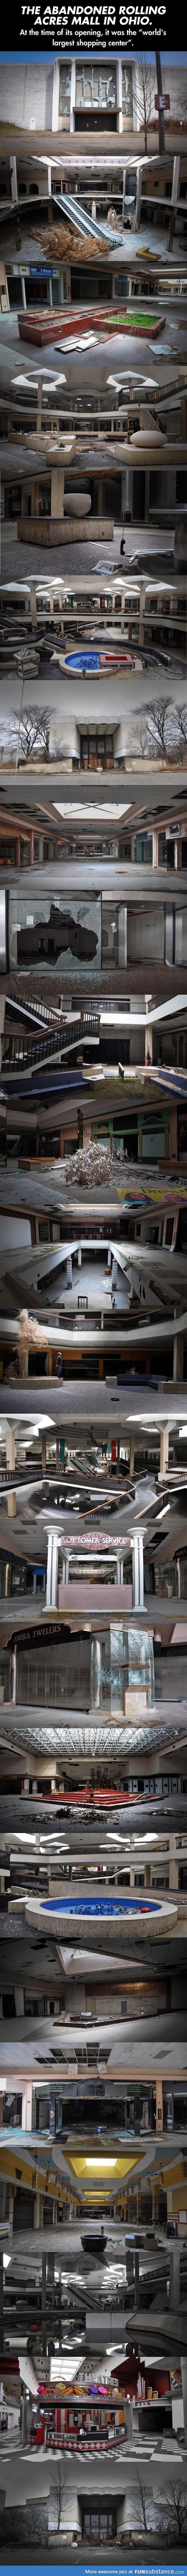 An abandoned shopping mall in Ohio